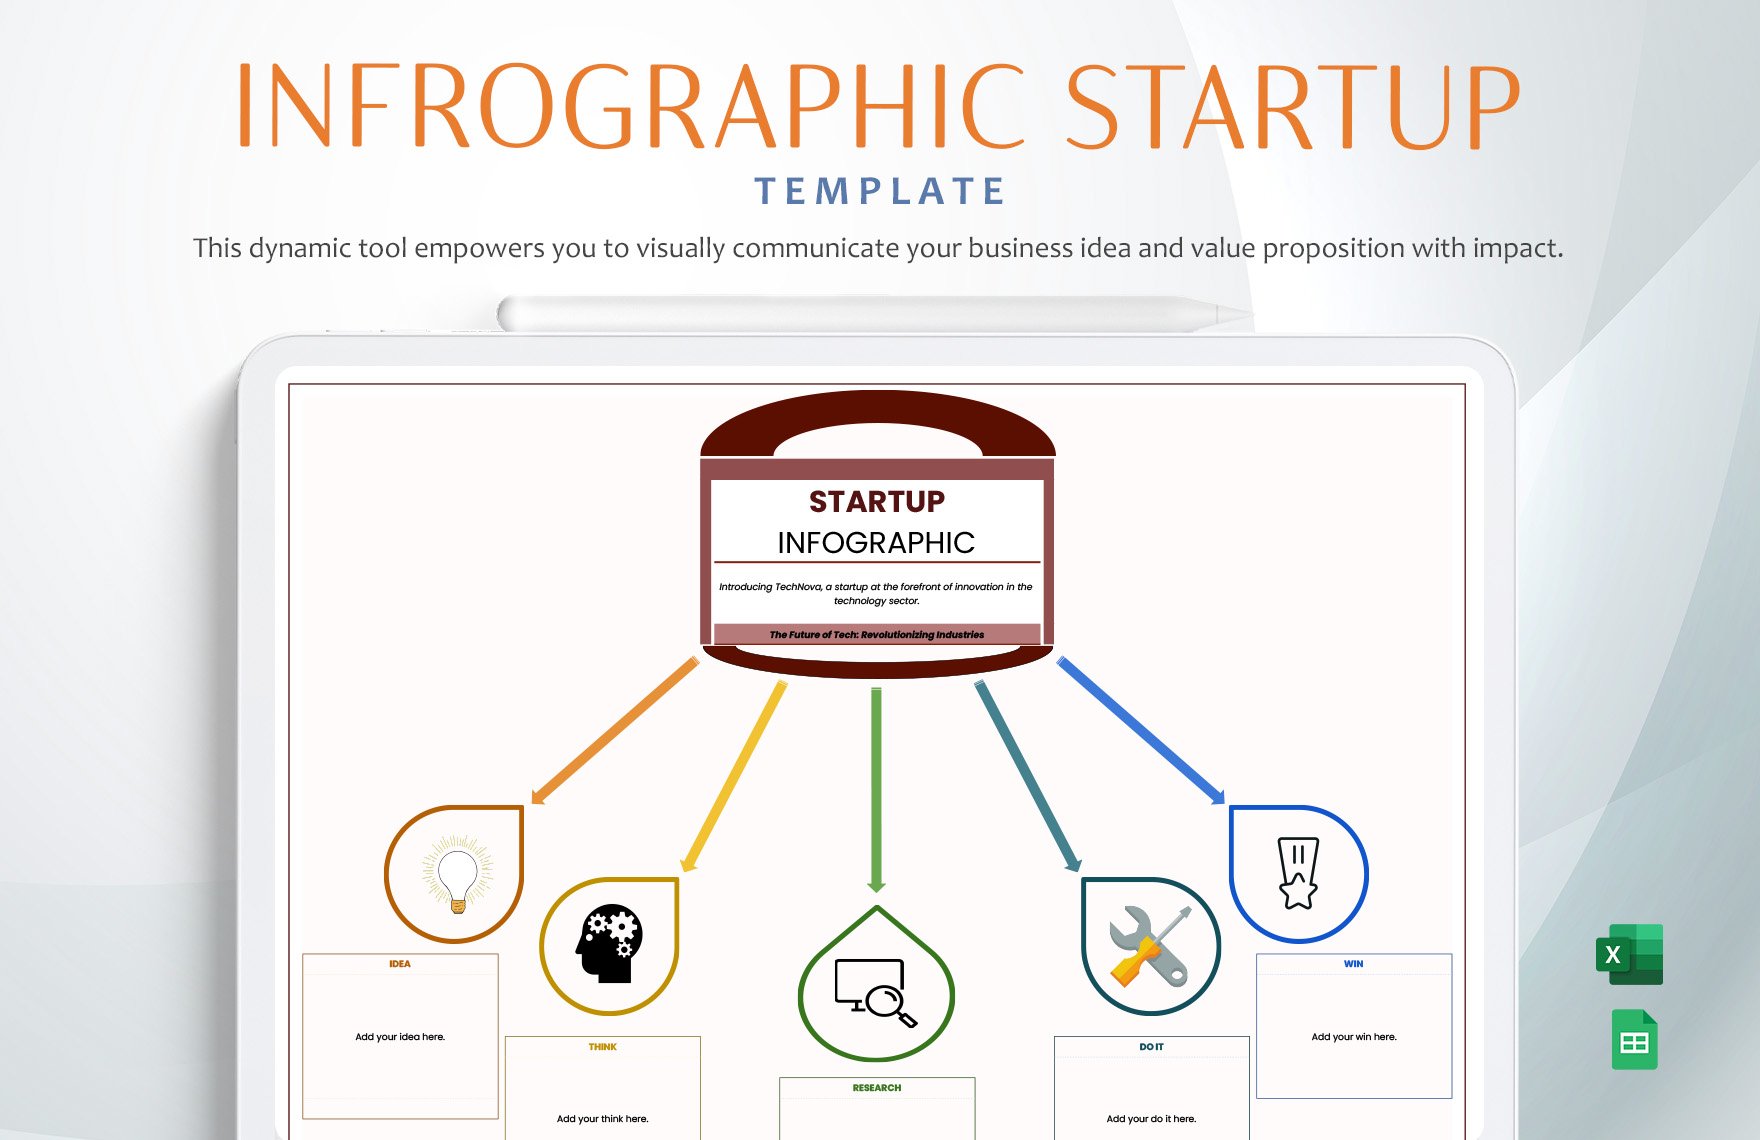 Infrographic Startup Template